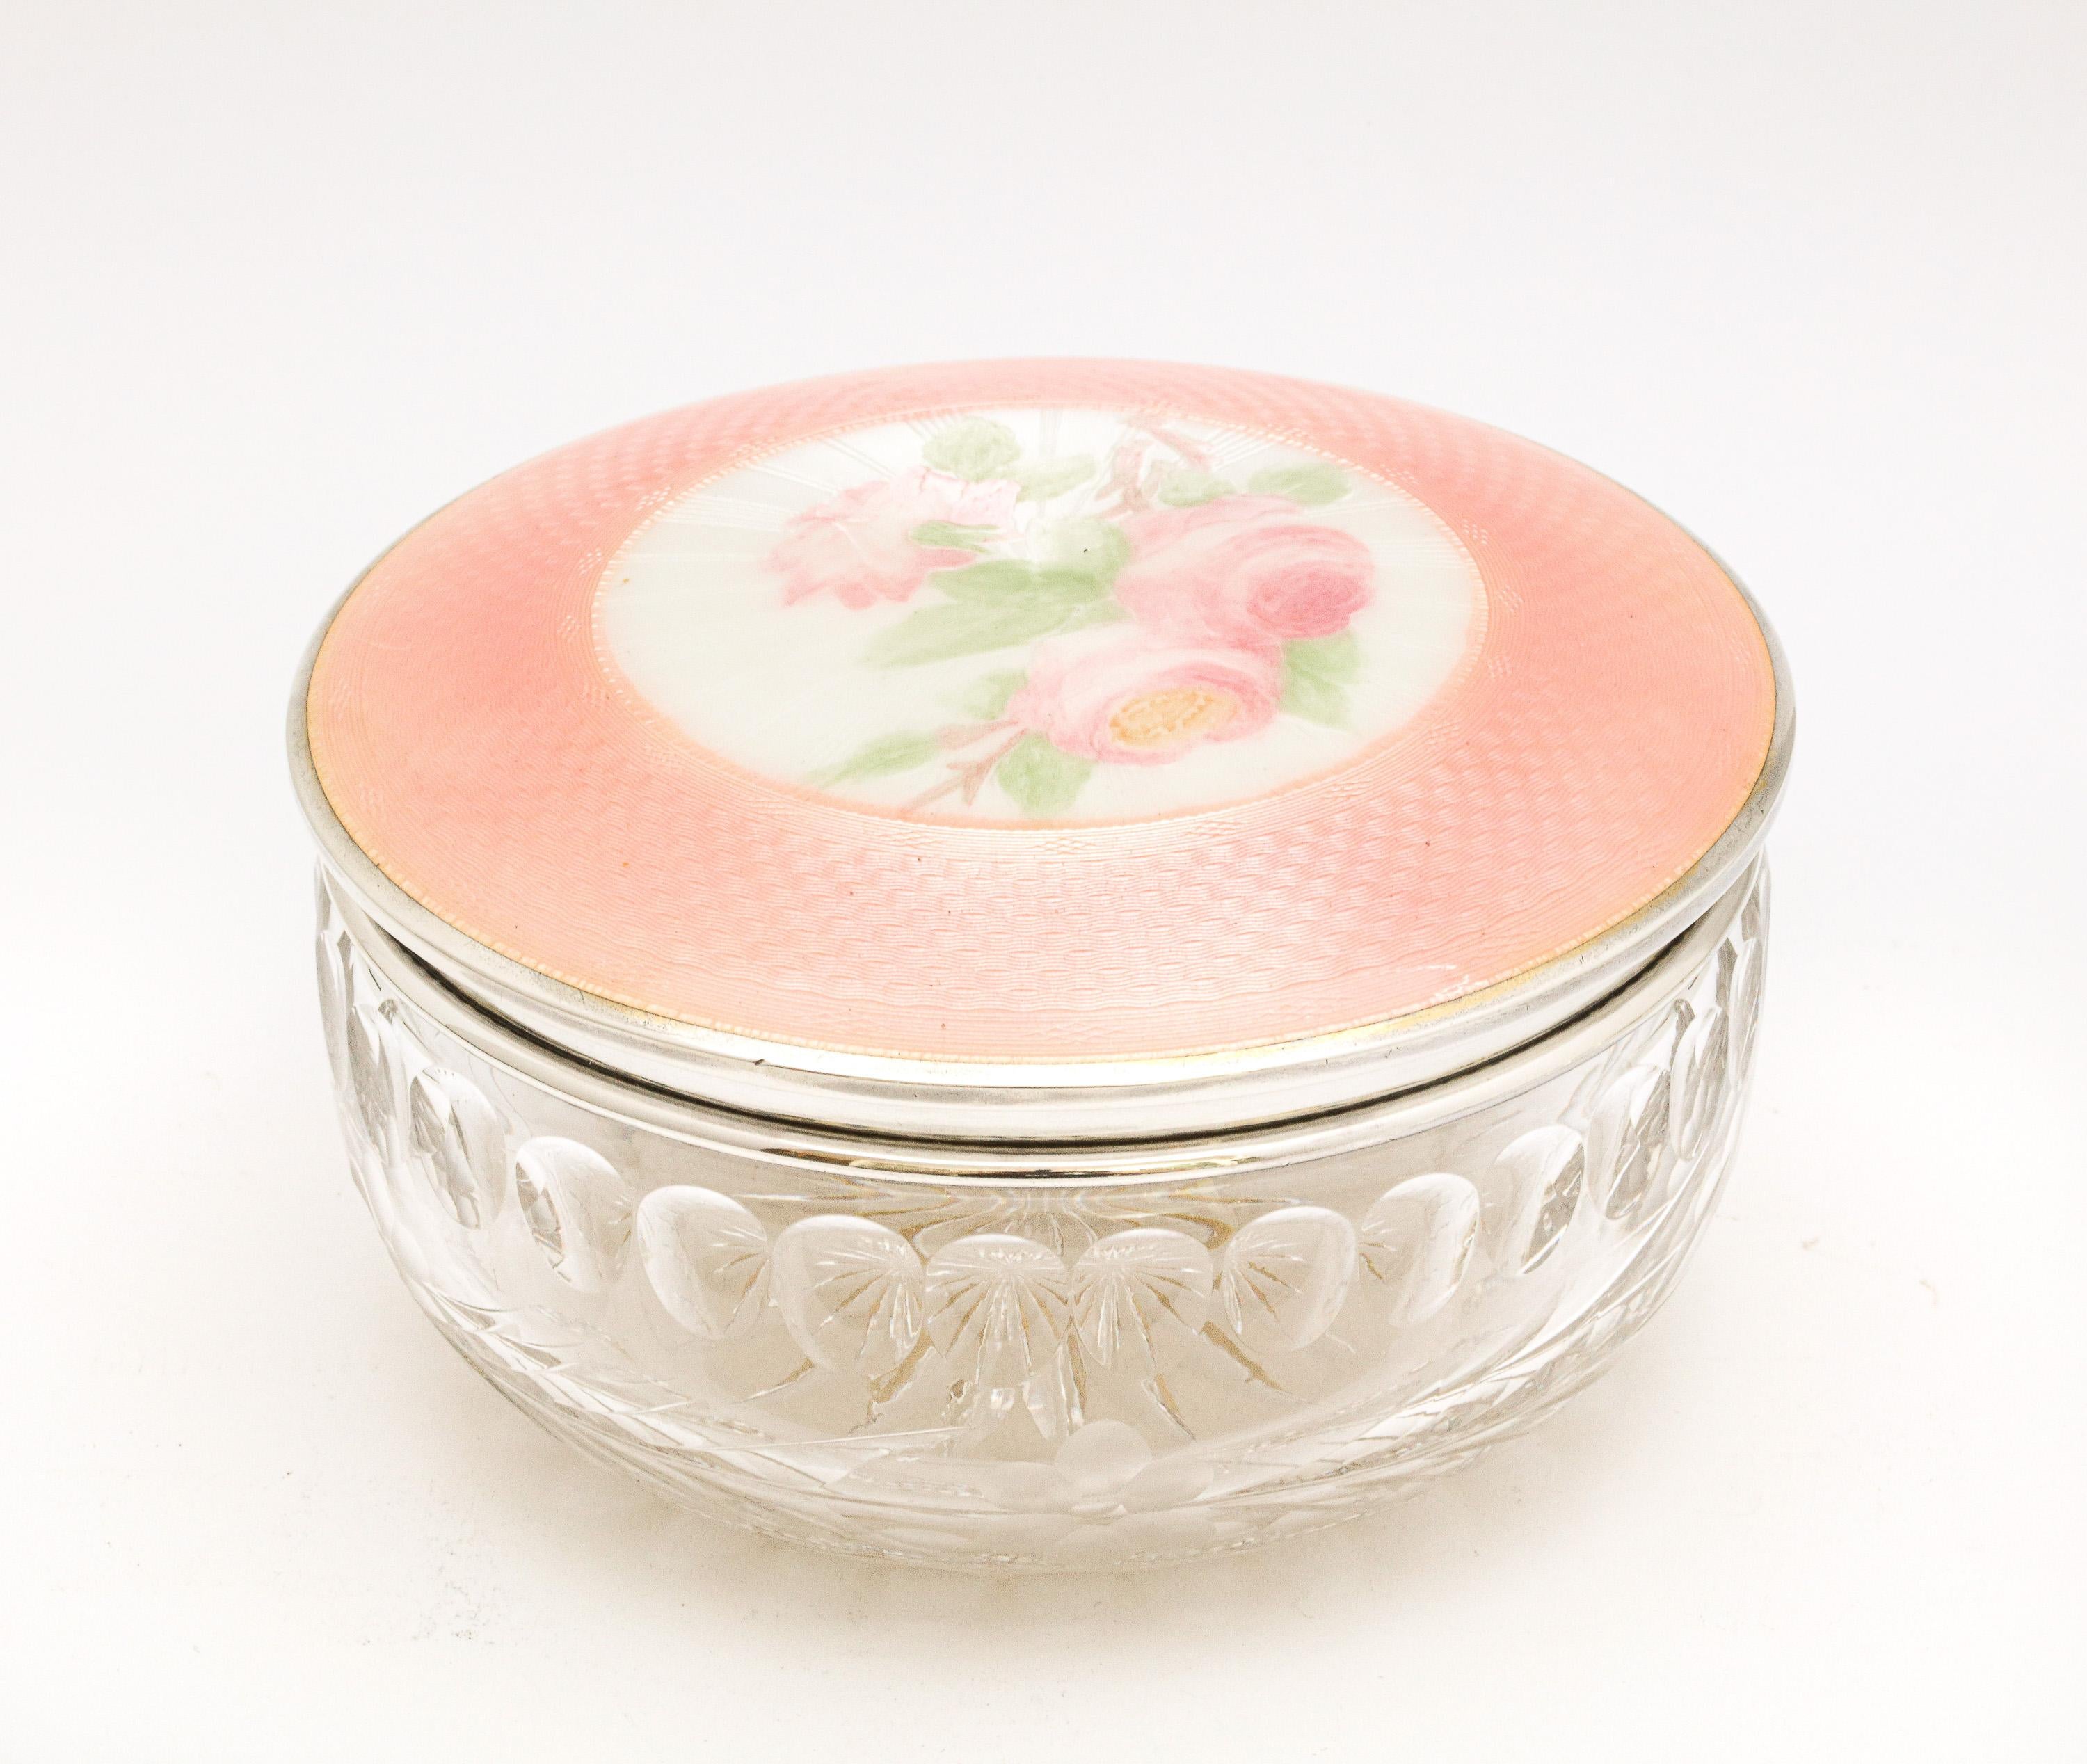 Victorian Period, sterling silver and peach guilloche enamel - mounted dressing table jar, Providence, Rhode Island, Ca. 1895, Foster and Bailey - makers. Sterling silver lid is bordered by peach guilloche enamel that shimmers in the light; center